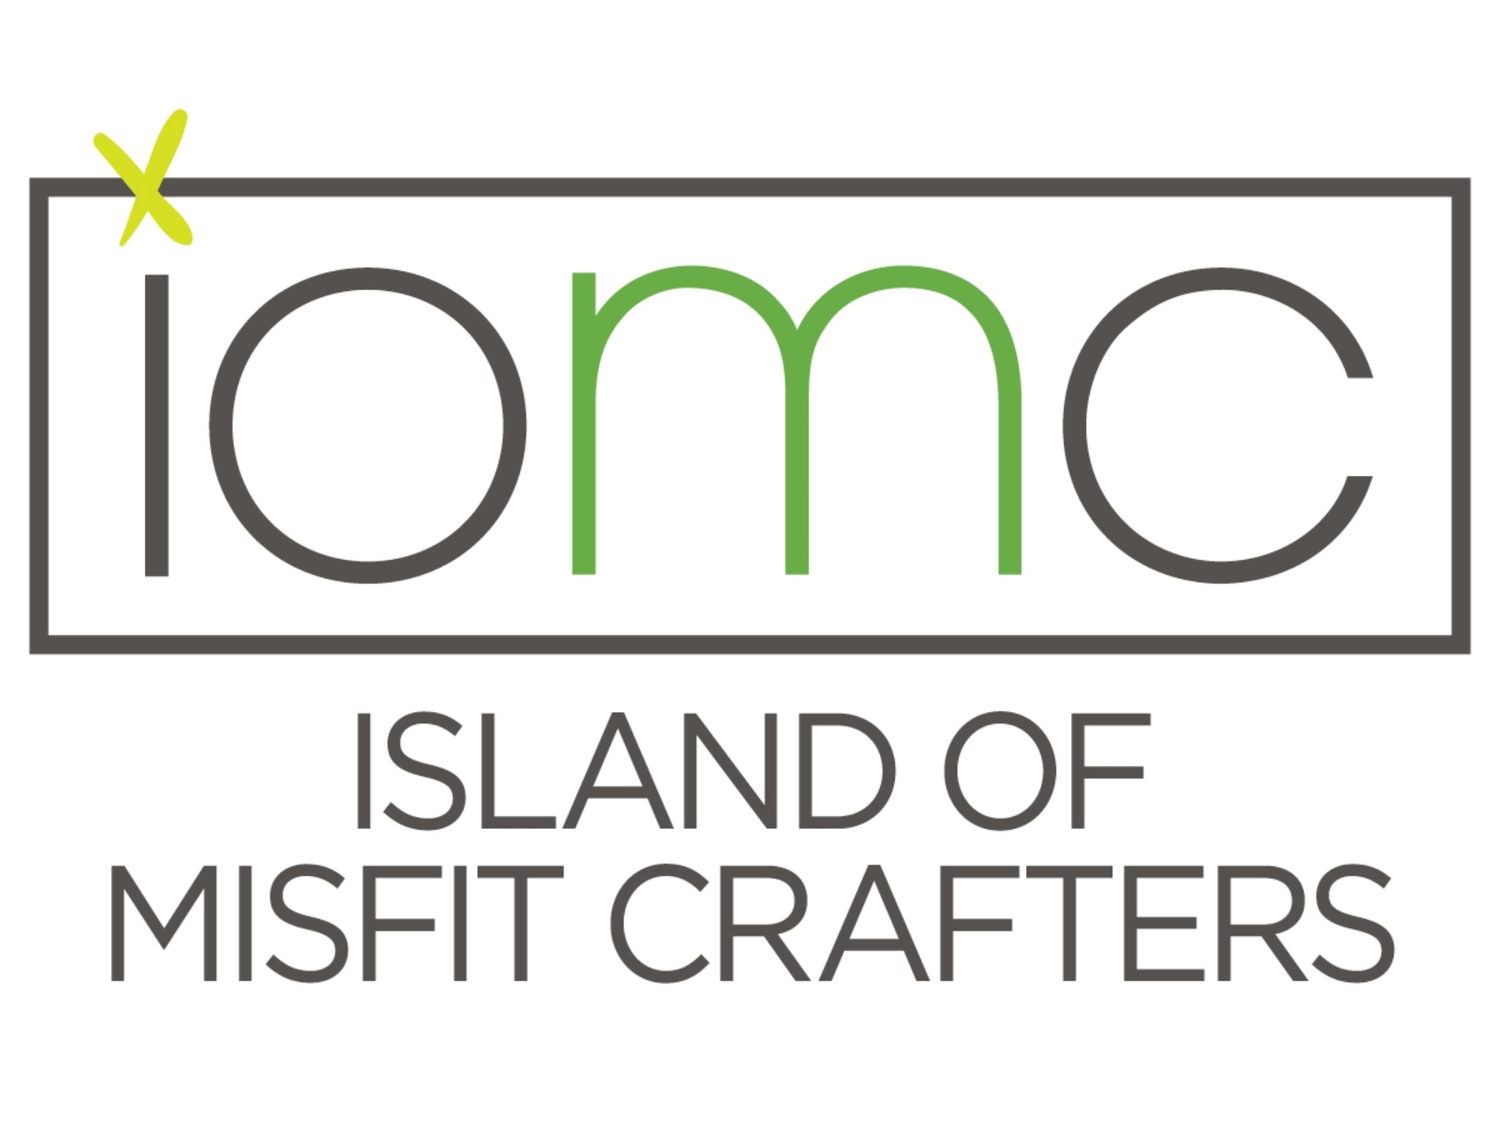 Island of Misfit Crafters